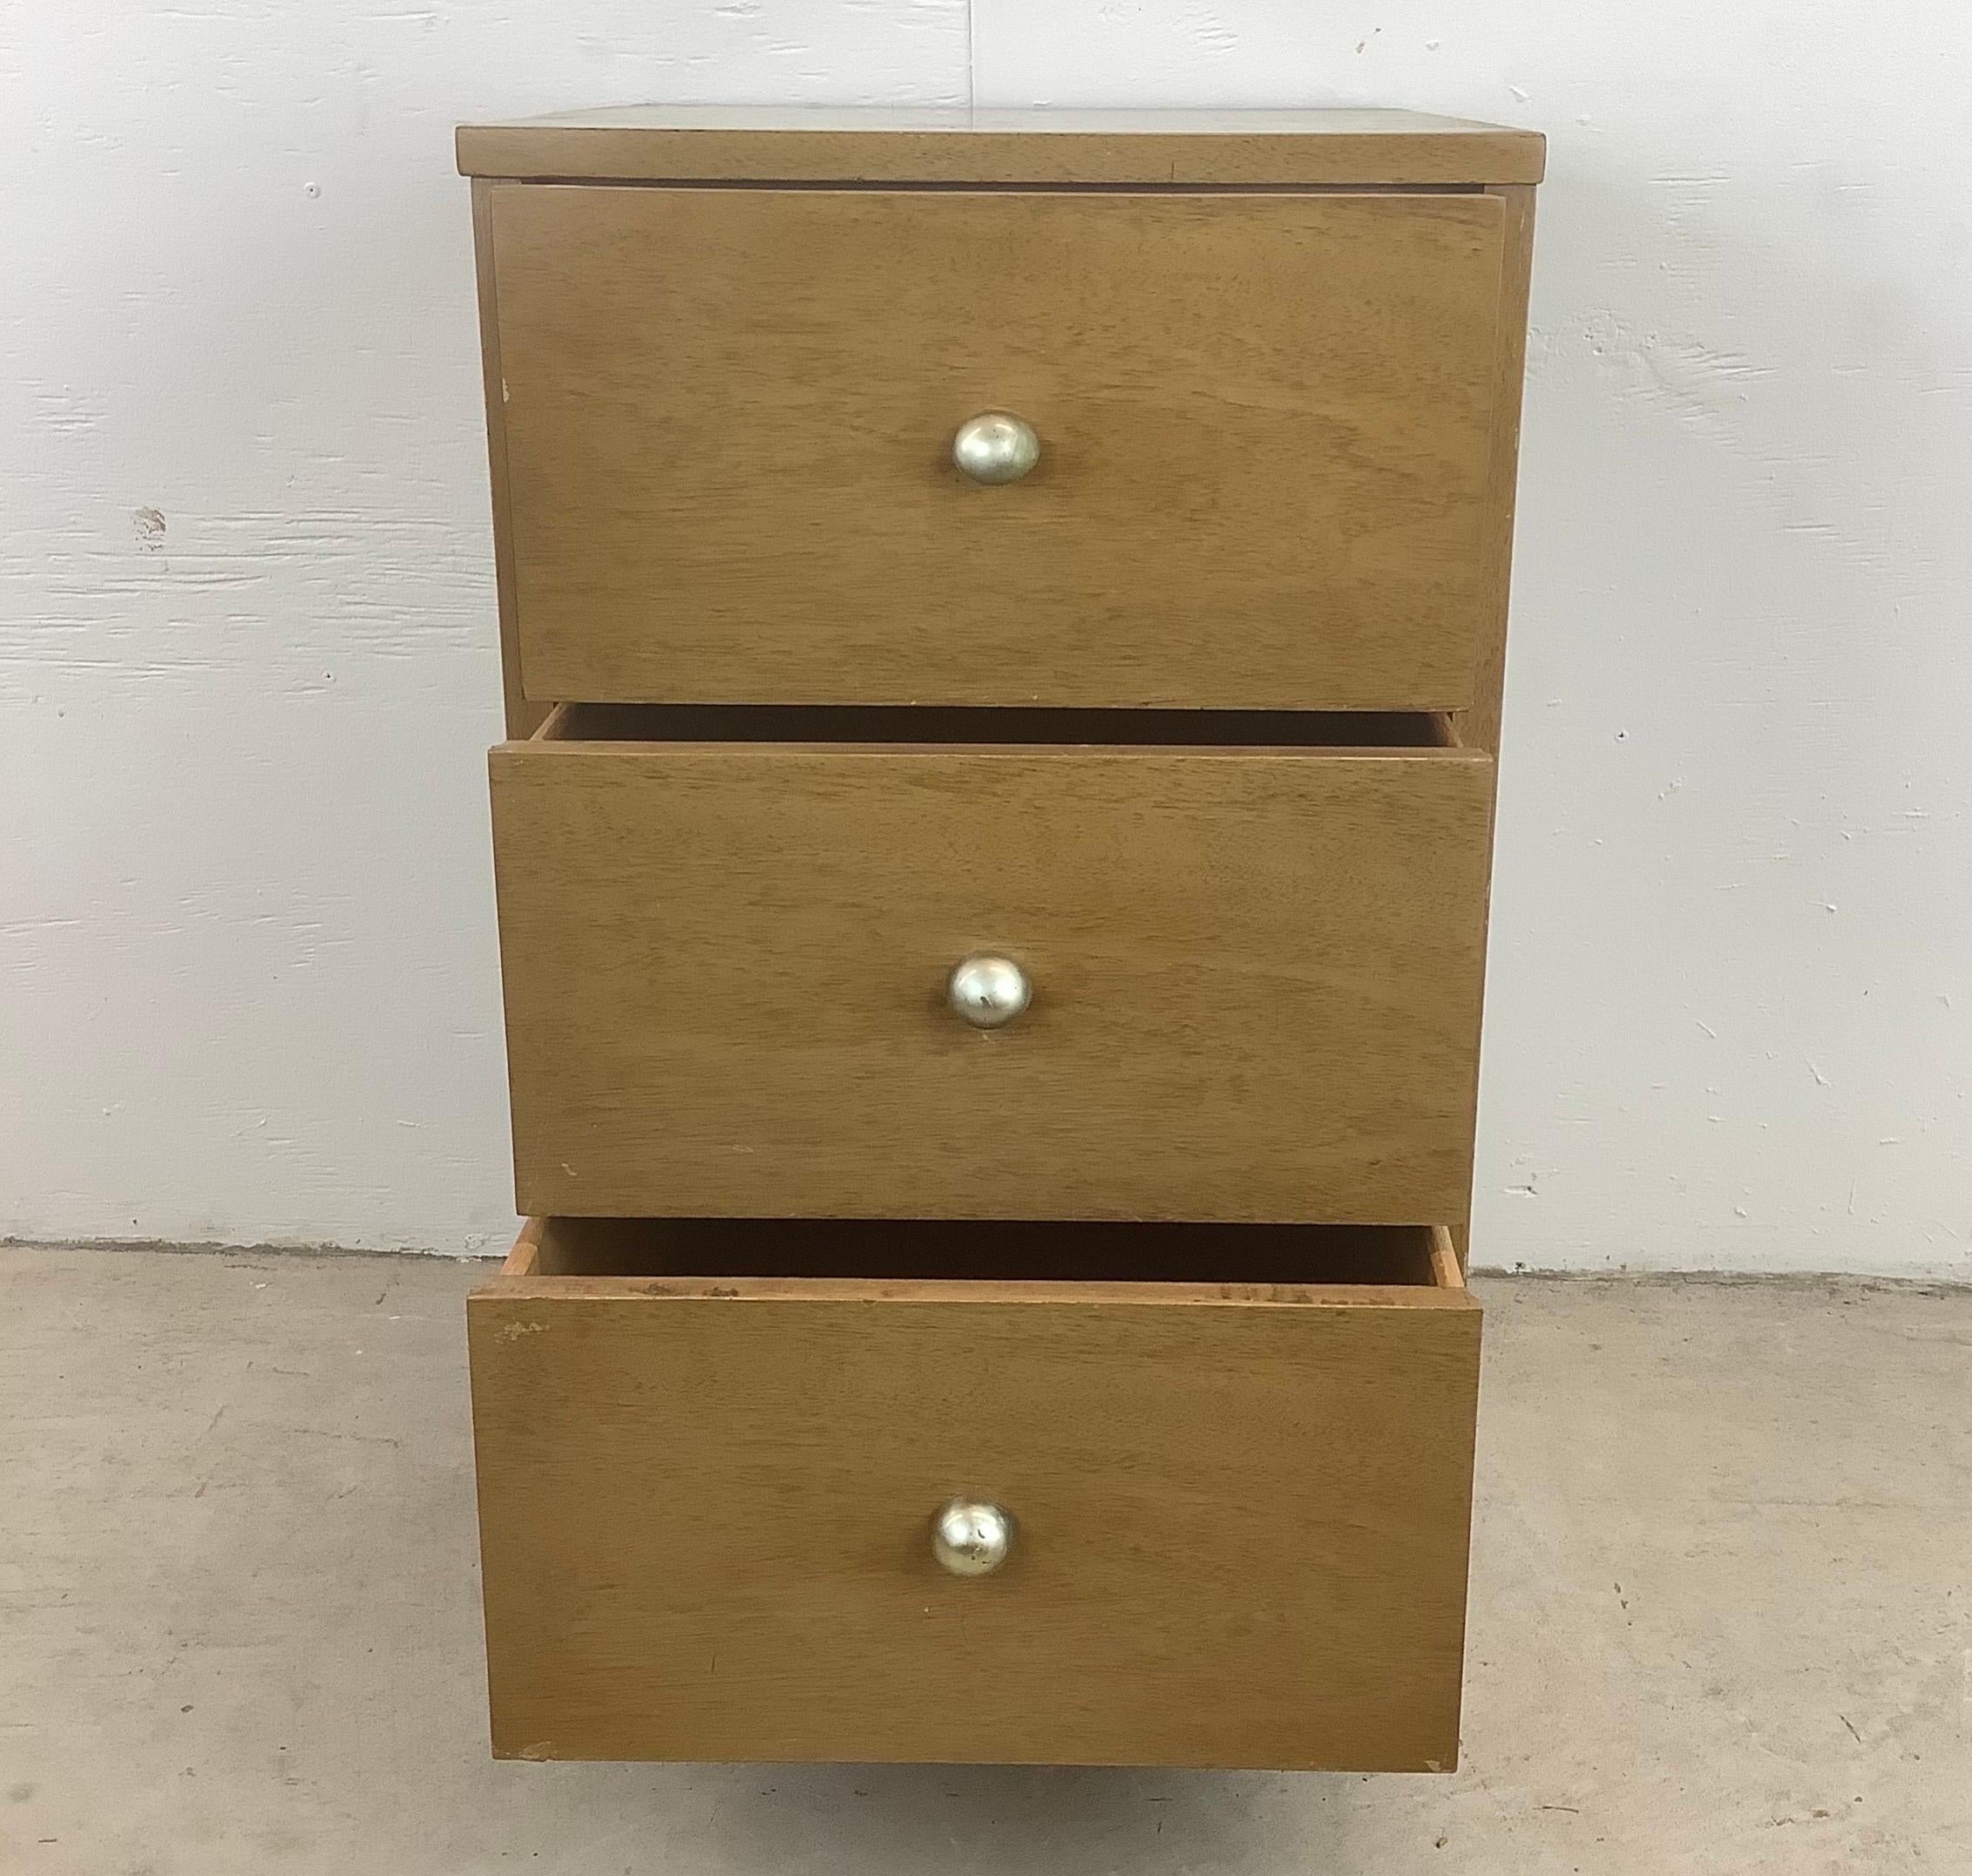 Upgrade your bedroom with the timeless charm of this Vintage Mid-Century Modern Kent Coffey 3-Drawer Chest or Nightstand. This striking vintage modern dresser from the Simplex line offers sleek storage solutions for any space.

Crafted with